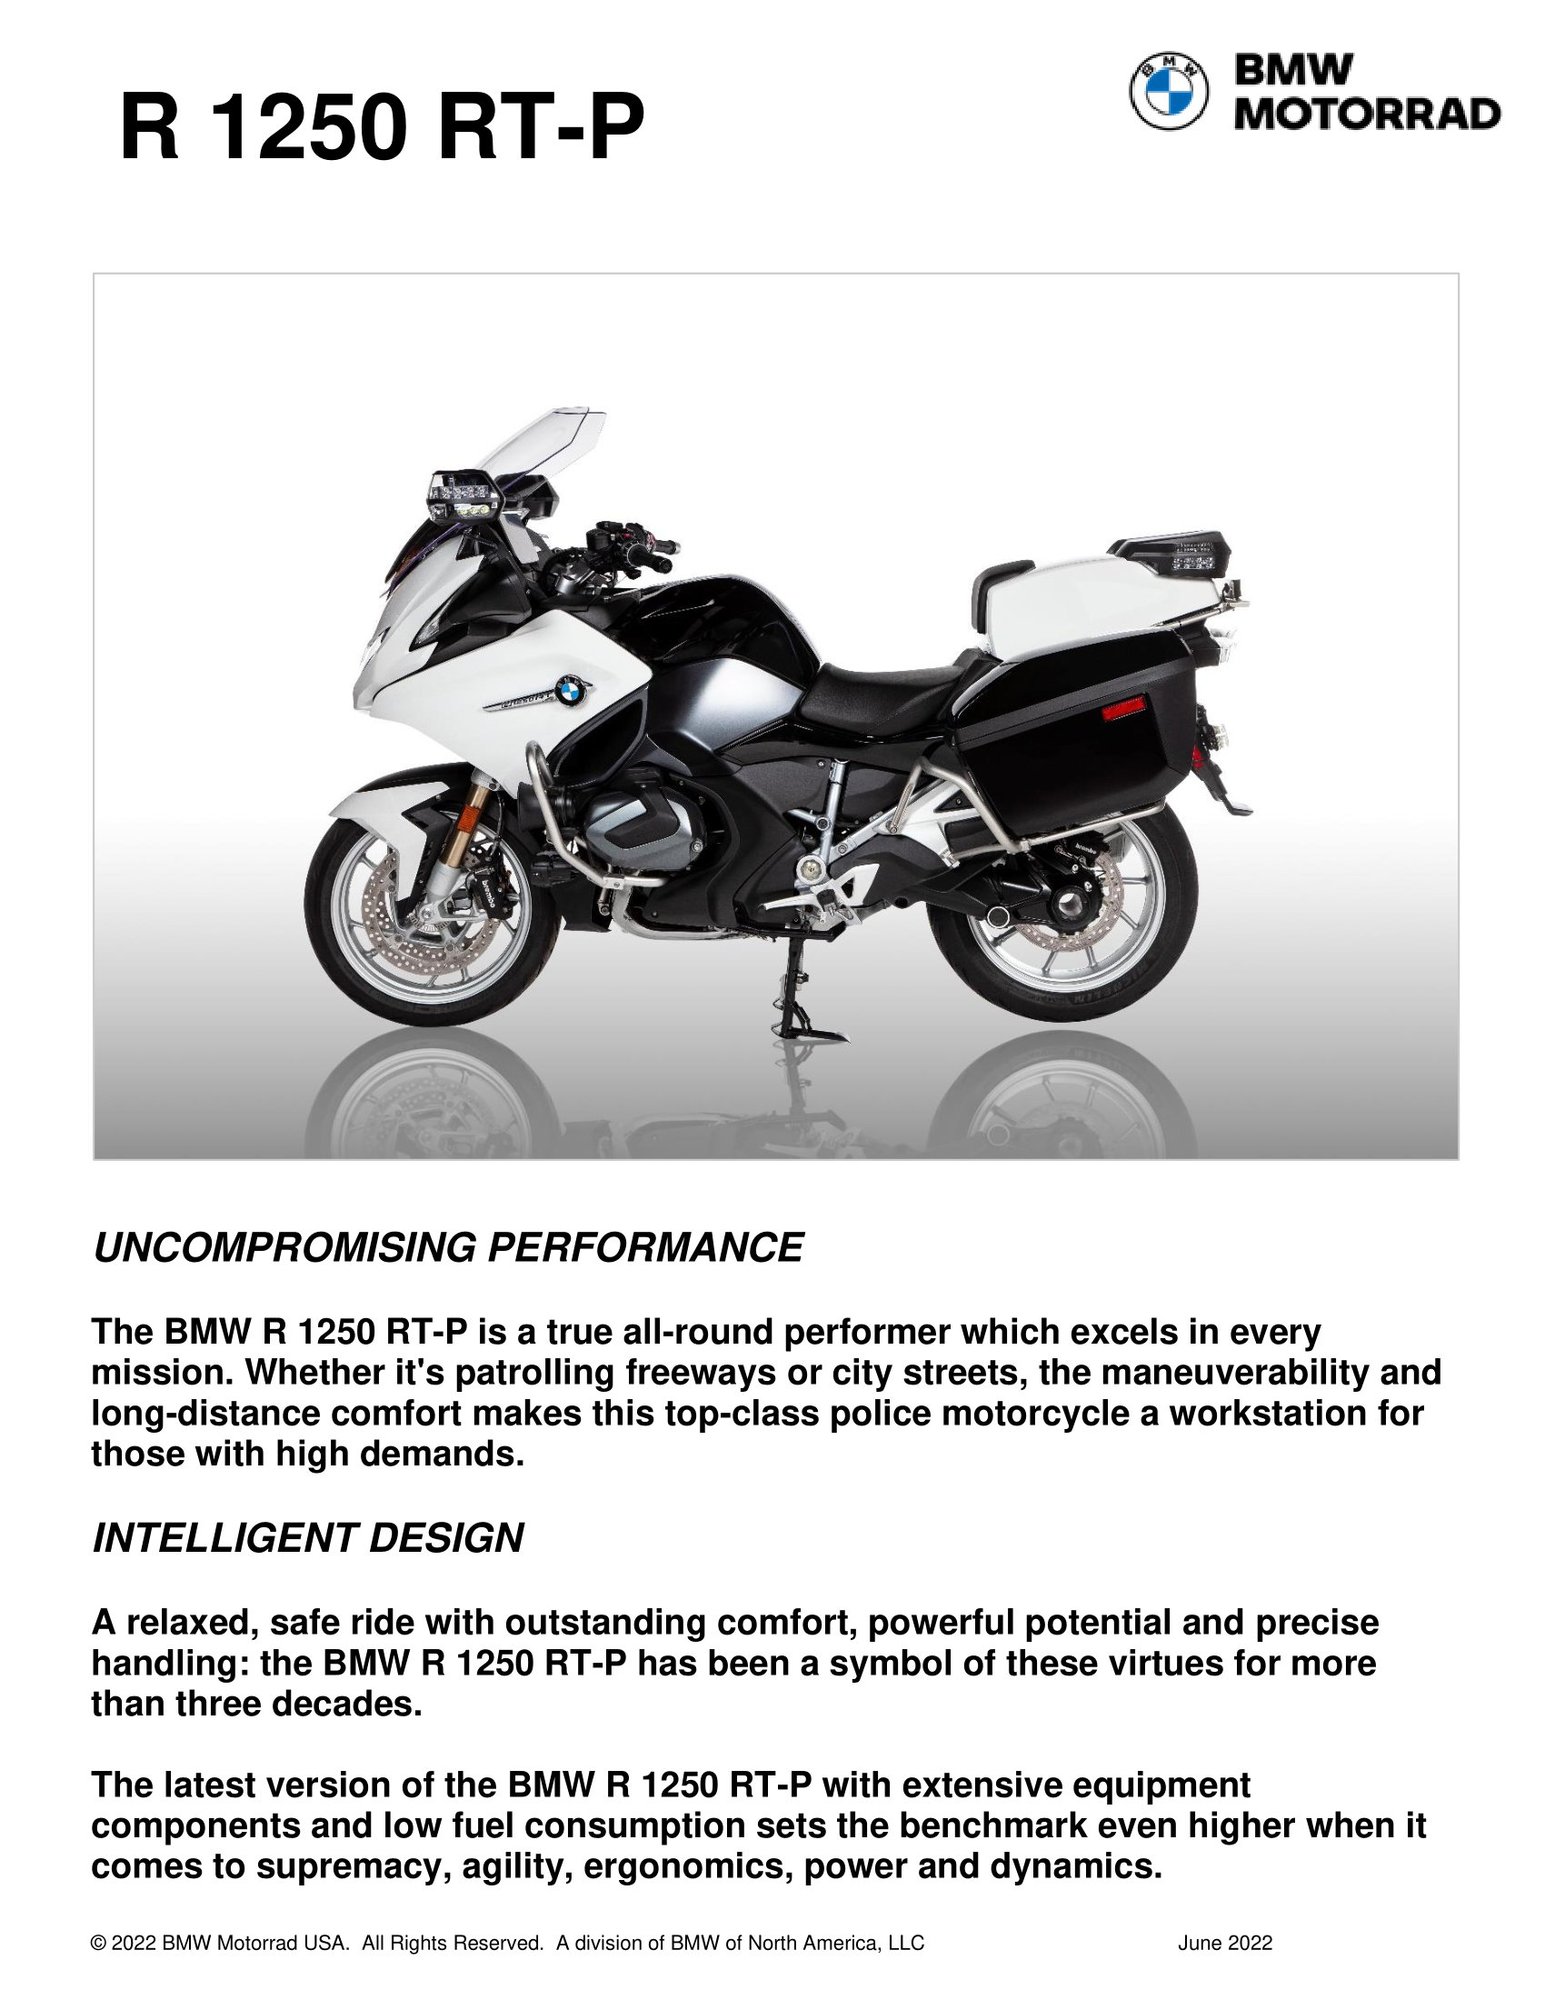 The R 1250 RT-P page 1